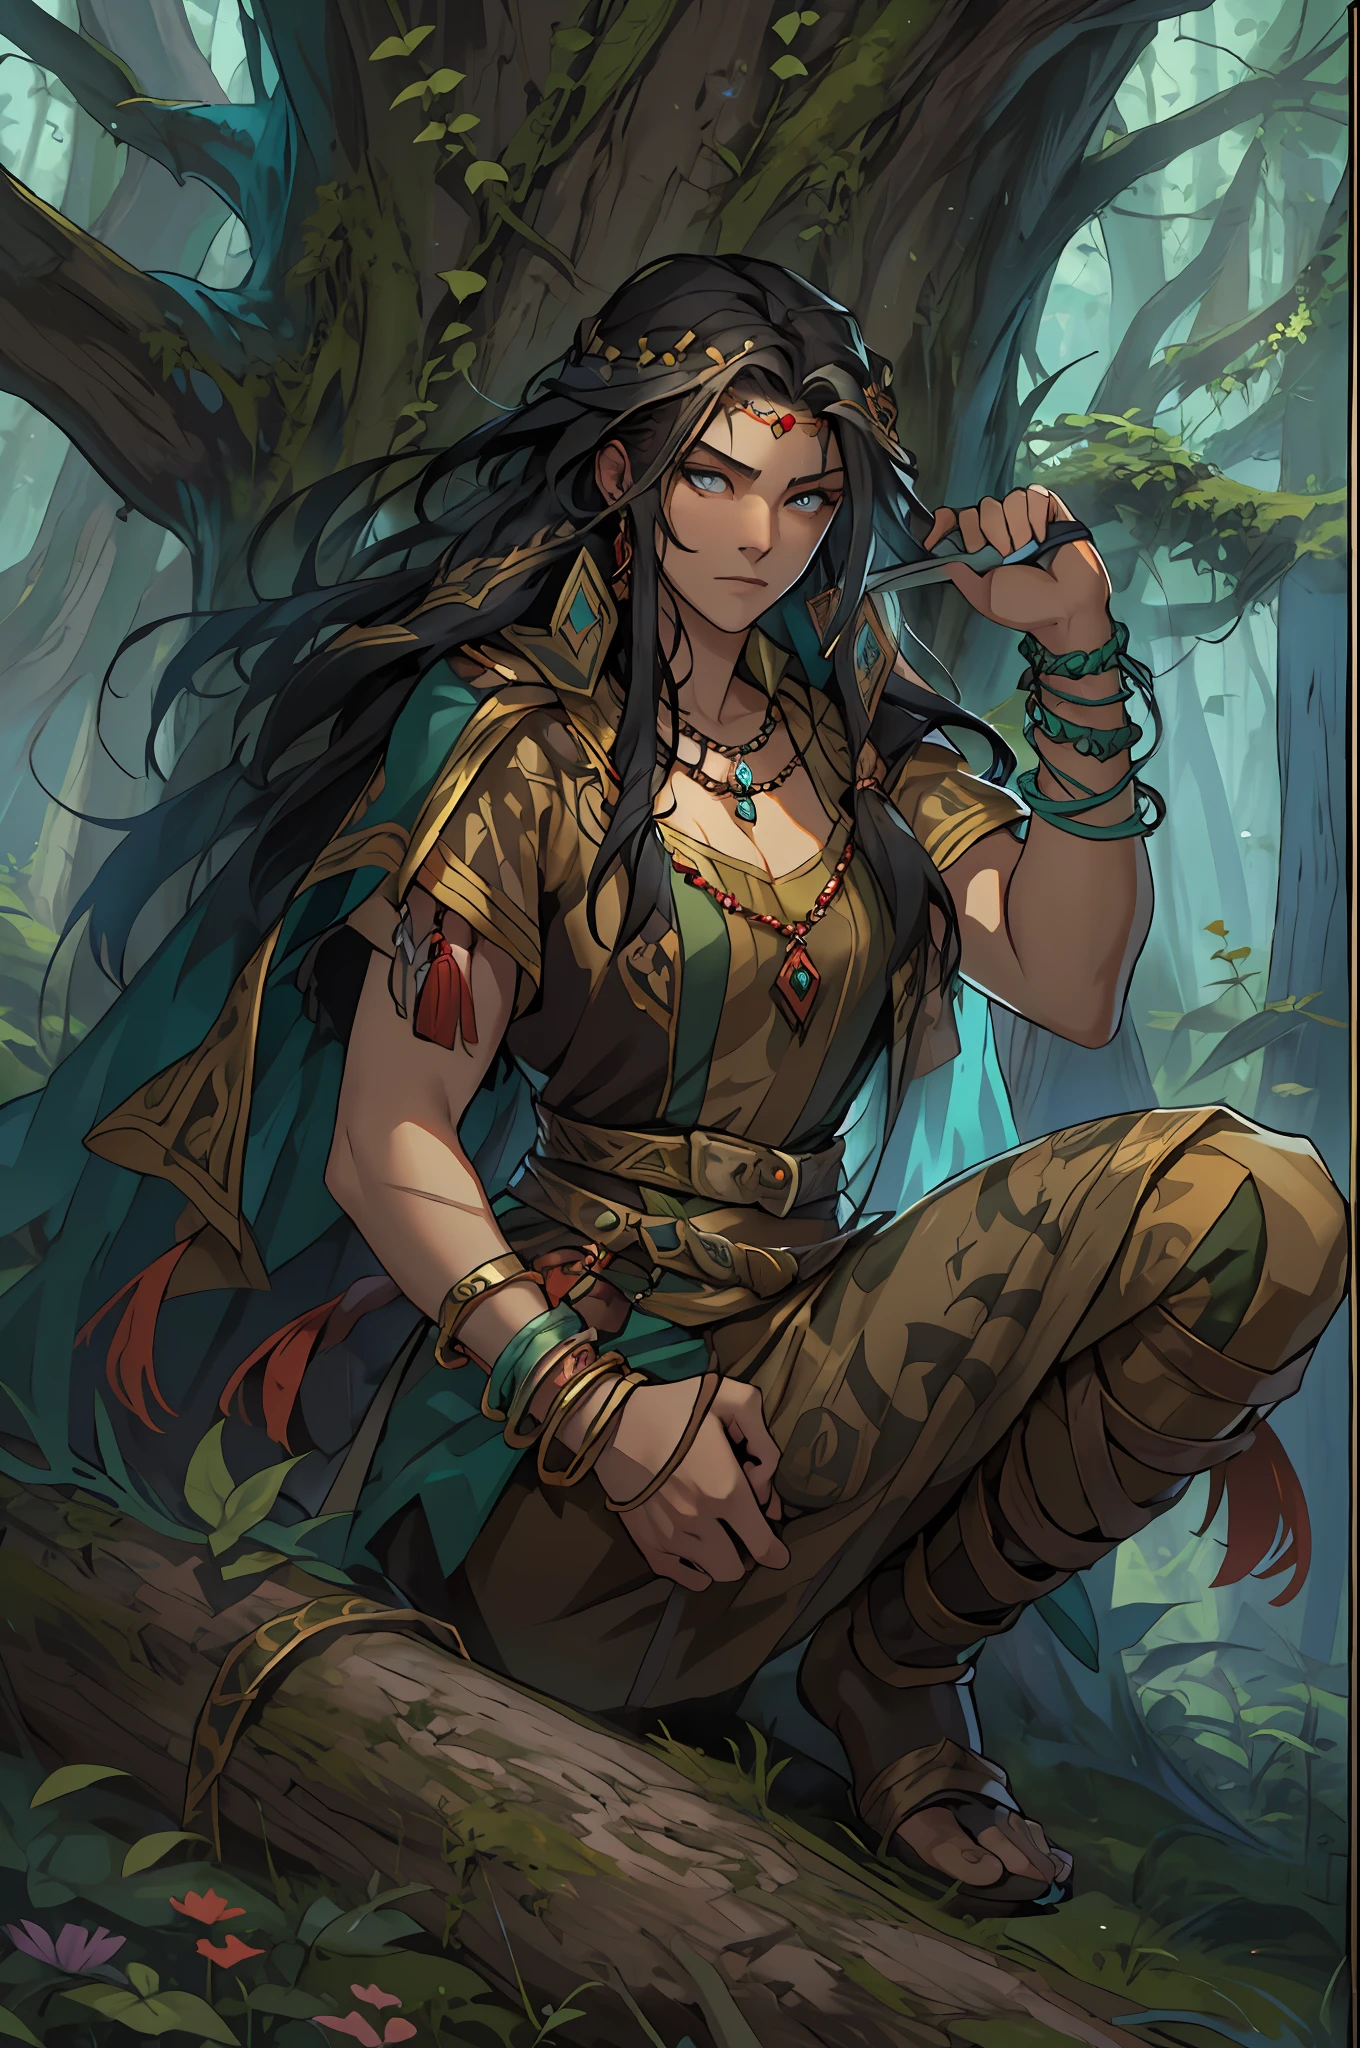 （1 Northern Girl，Animal fur clothing，Norse primitives），Anatomically correct, Solo, （shaman, Nature, Healer, wild hairs, Dark black hair, Unkempt hair, longspear, pretty eyes, Long bead necklace, Bead bracelet, trinkets, Vines in hair, Thick body, Wide body,Fantasy setting）, Outdoor activities in a dream forest, Ancient ruins, Magic the Gathering, dungeons and dragons, character concept, character art, Character portrait, Cartoon, Best quality, Best resolution, 4K, Vivid colors, Vivid, High detail, best detail, confident pose, extrovert, look from down, Serious expression